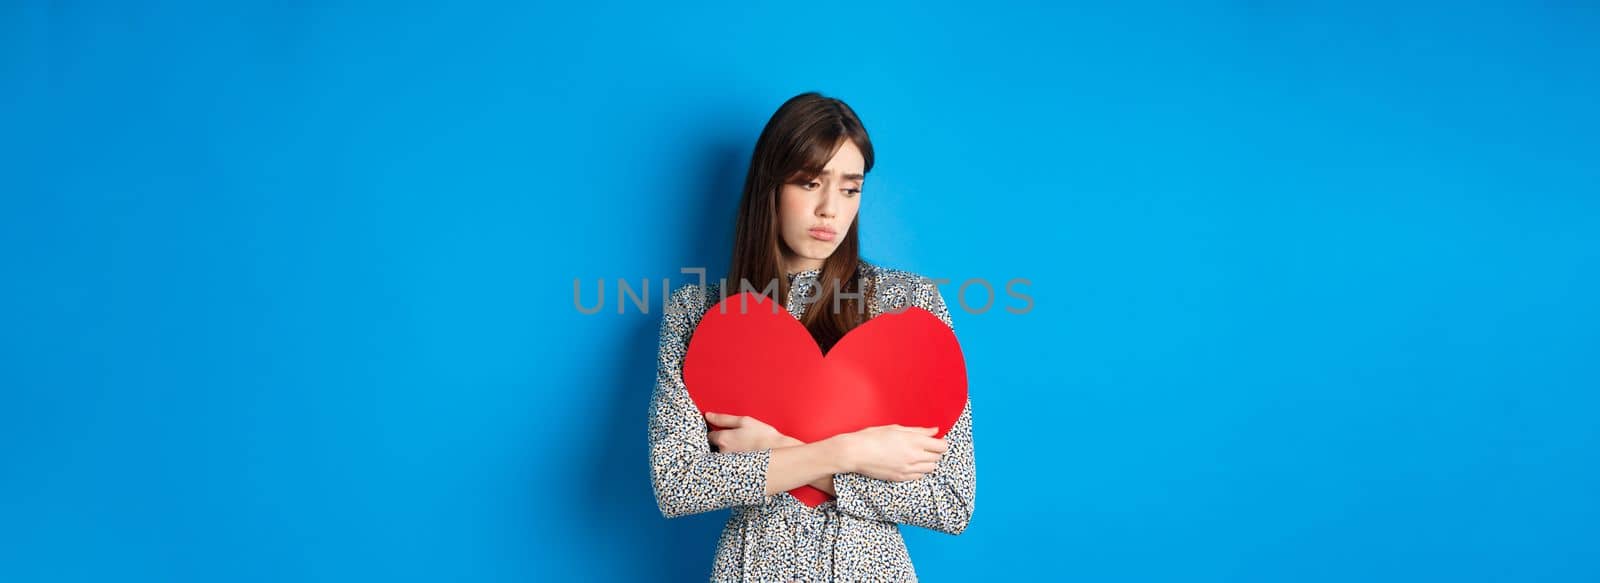 Valentines day. Lonely single girl hugging big red heart cutout and looking down upset, standing gloomy on blue background.